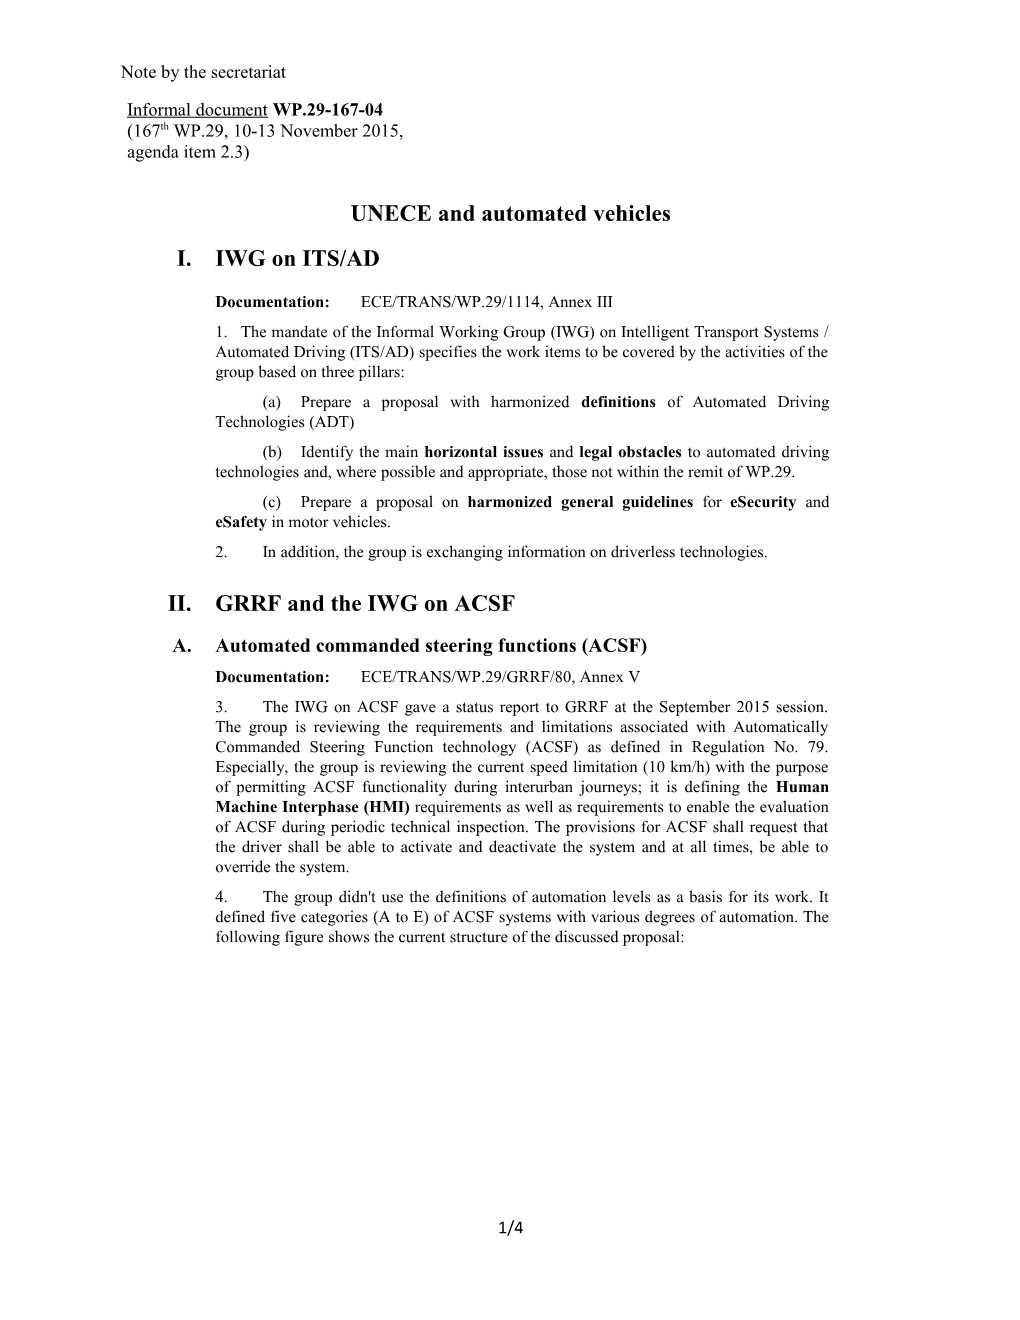 UNECE and Automated Vehicles